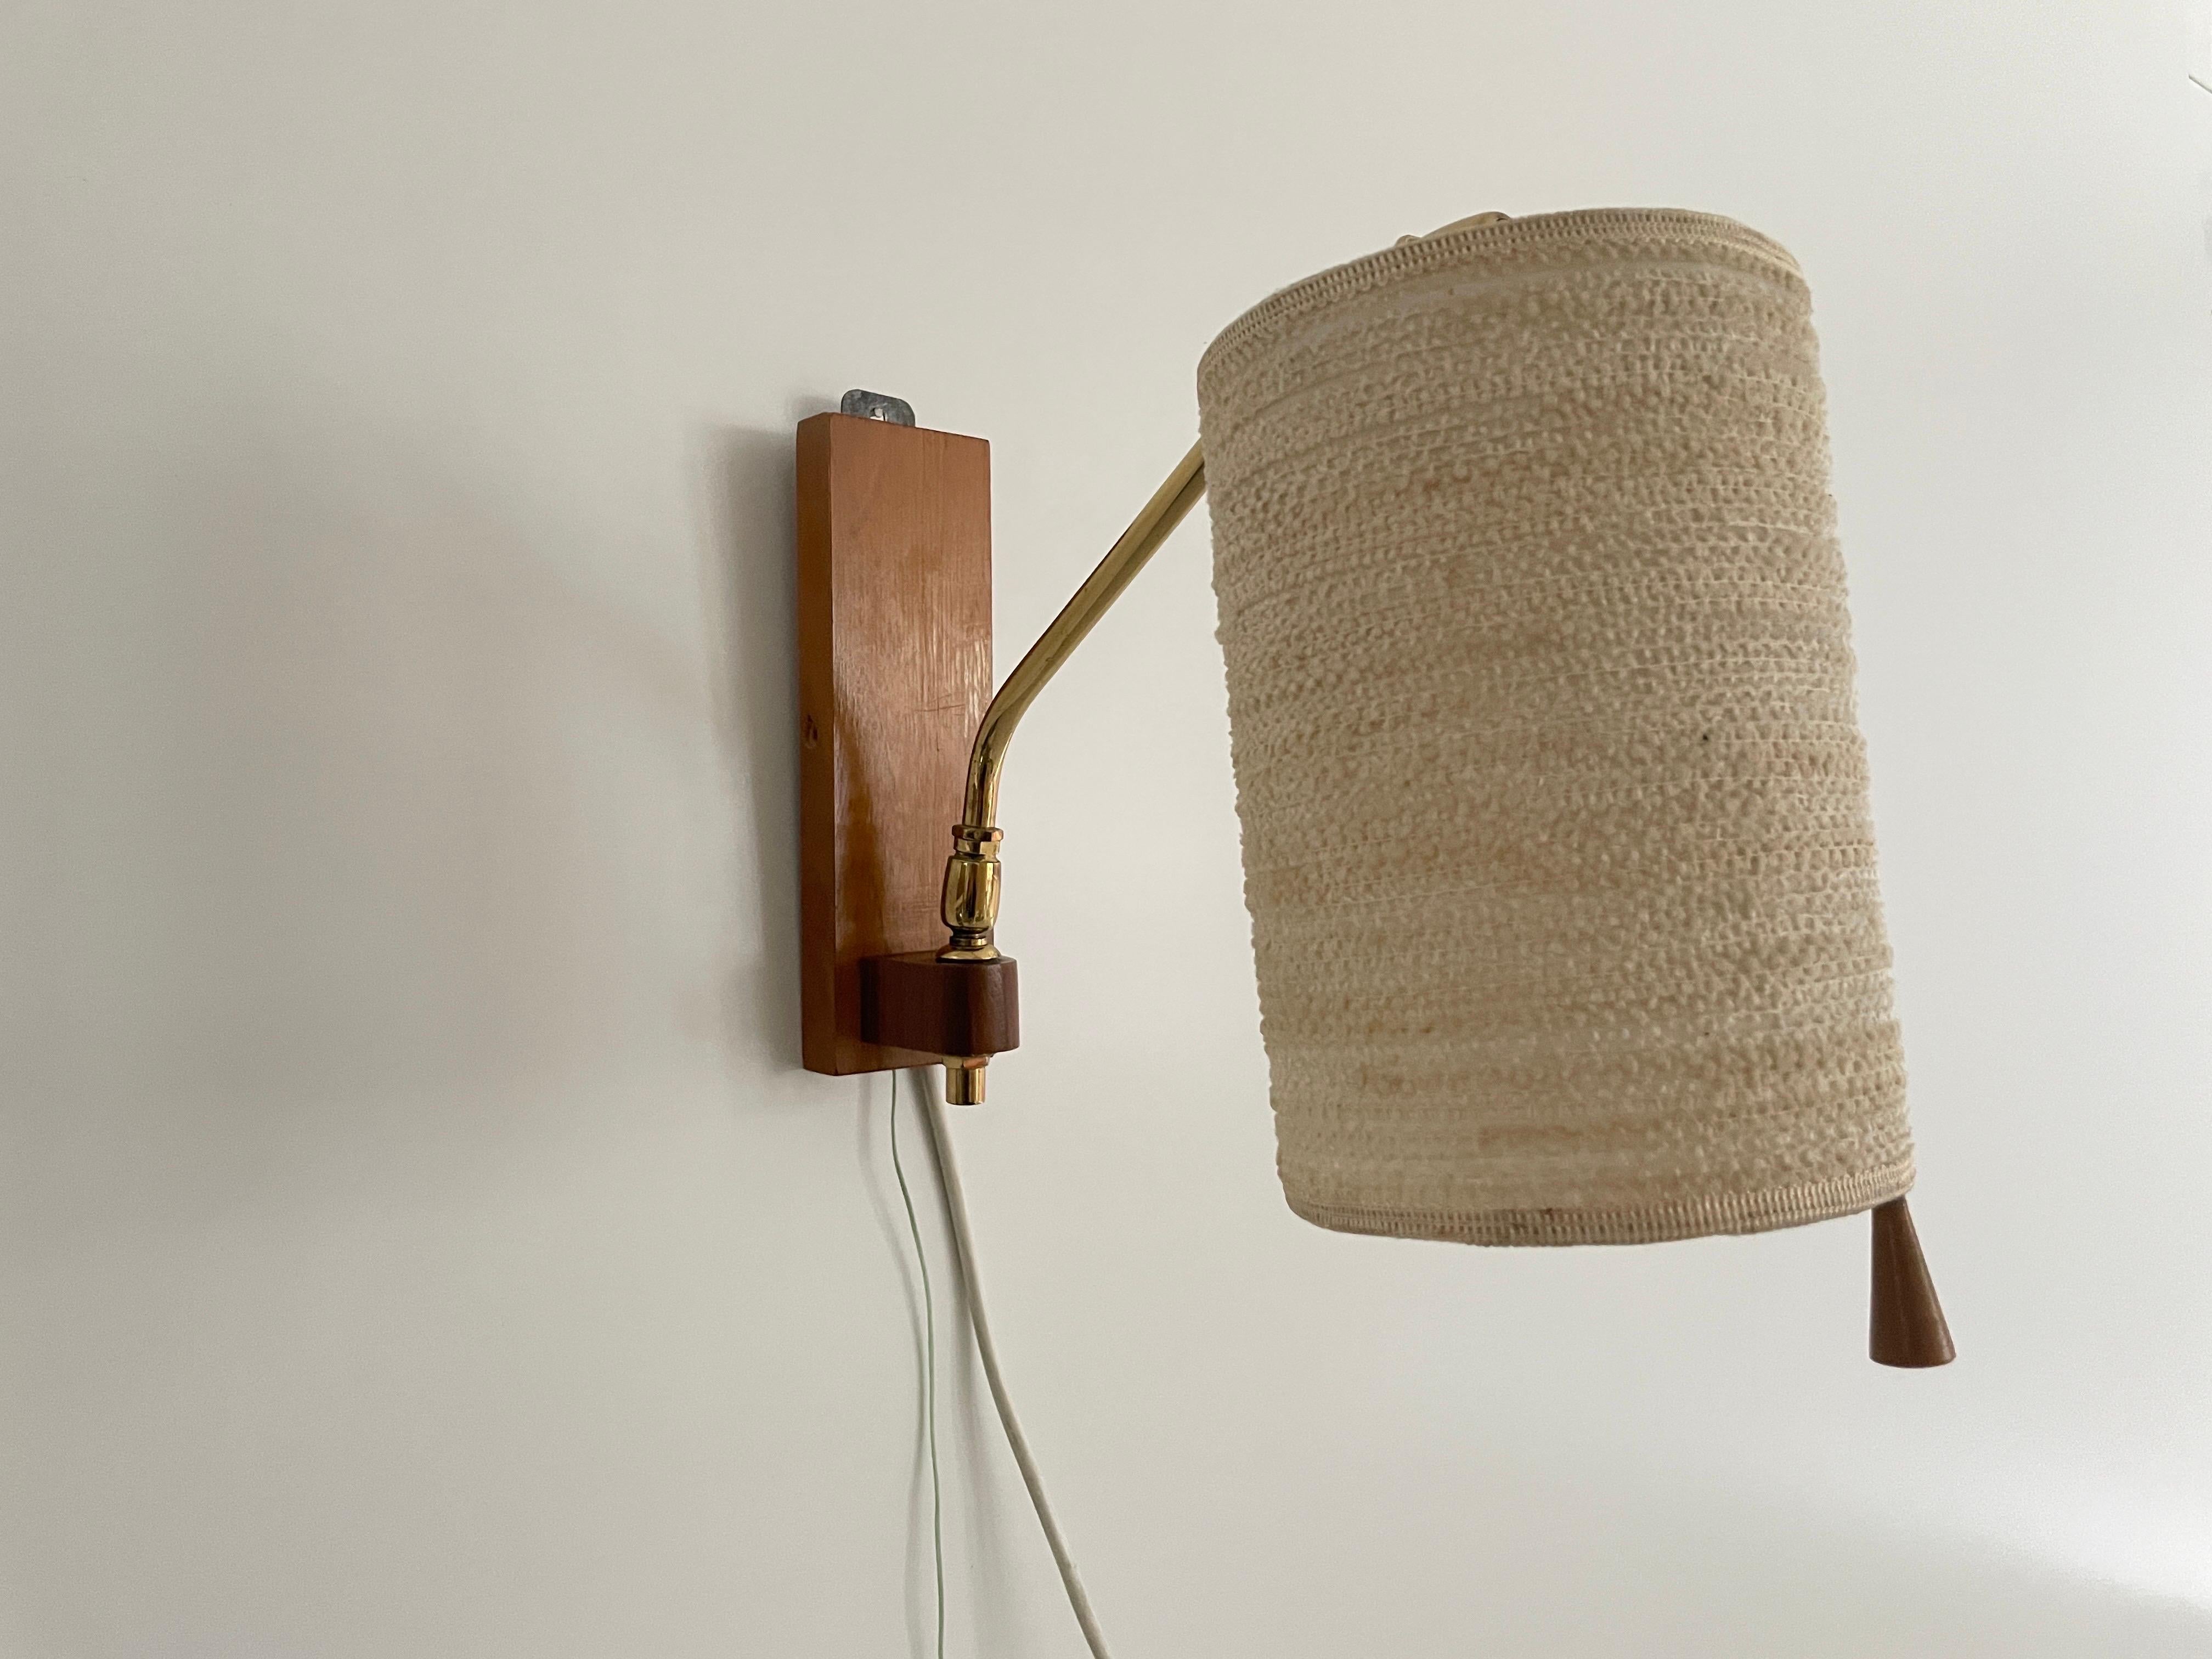 Fabric Shade and Wood Wall Lamp with Brass Neck, 1960s, Germany For Sale 1